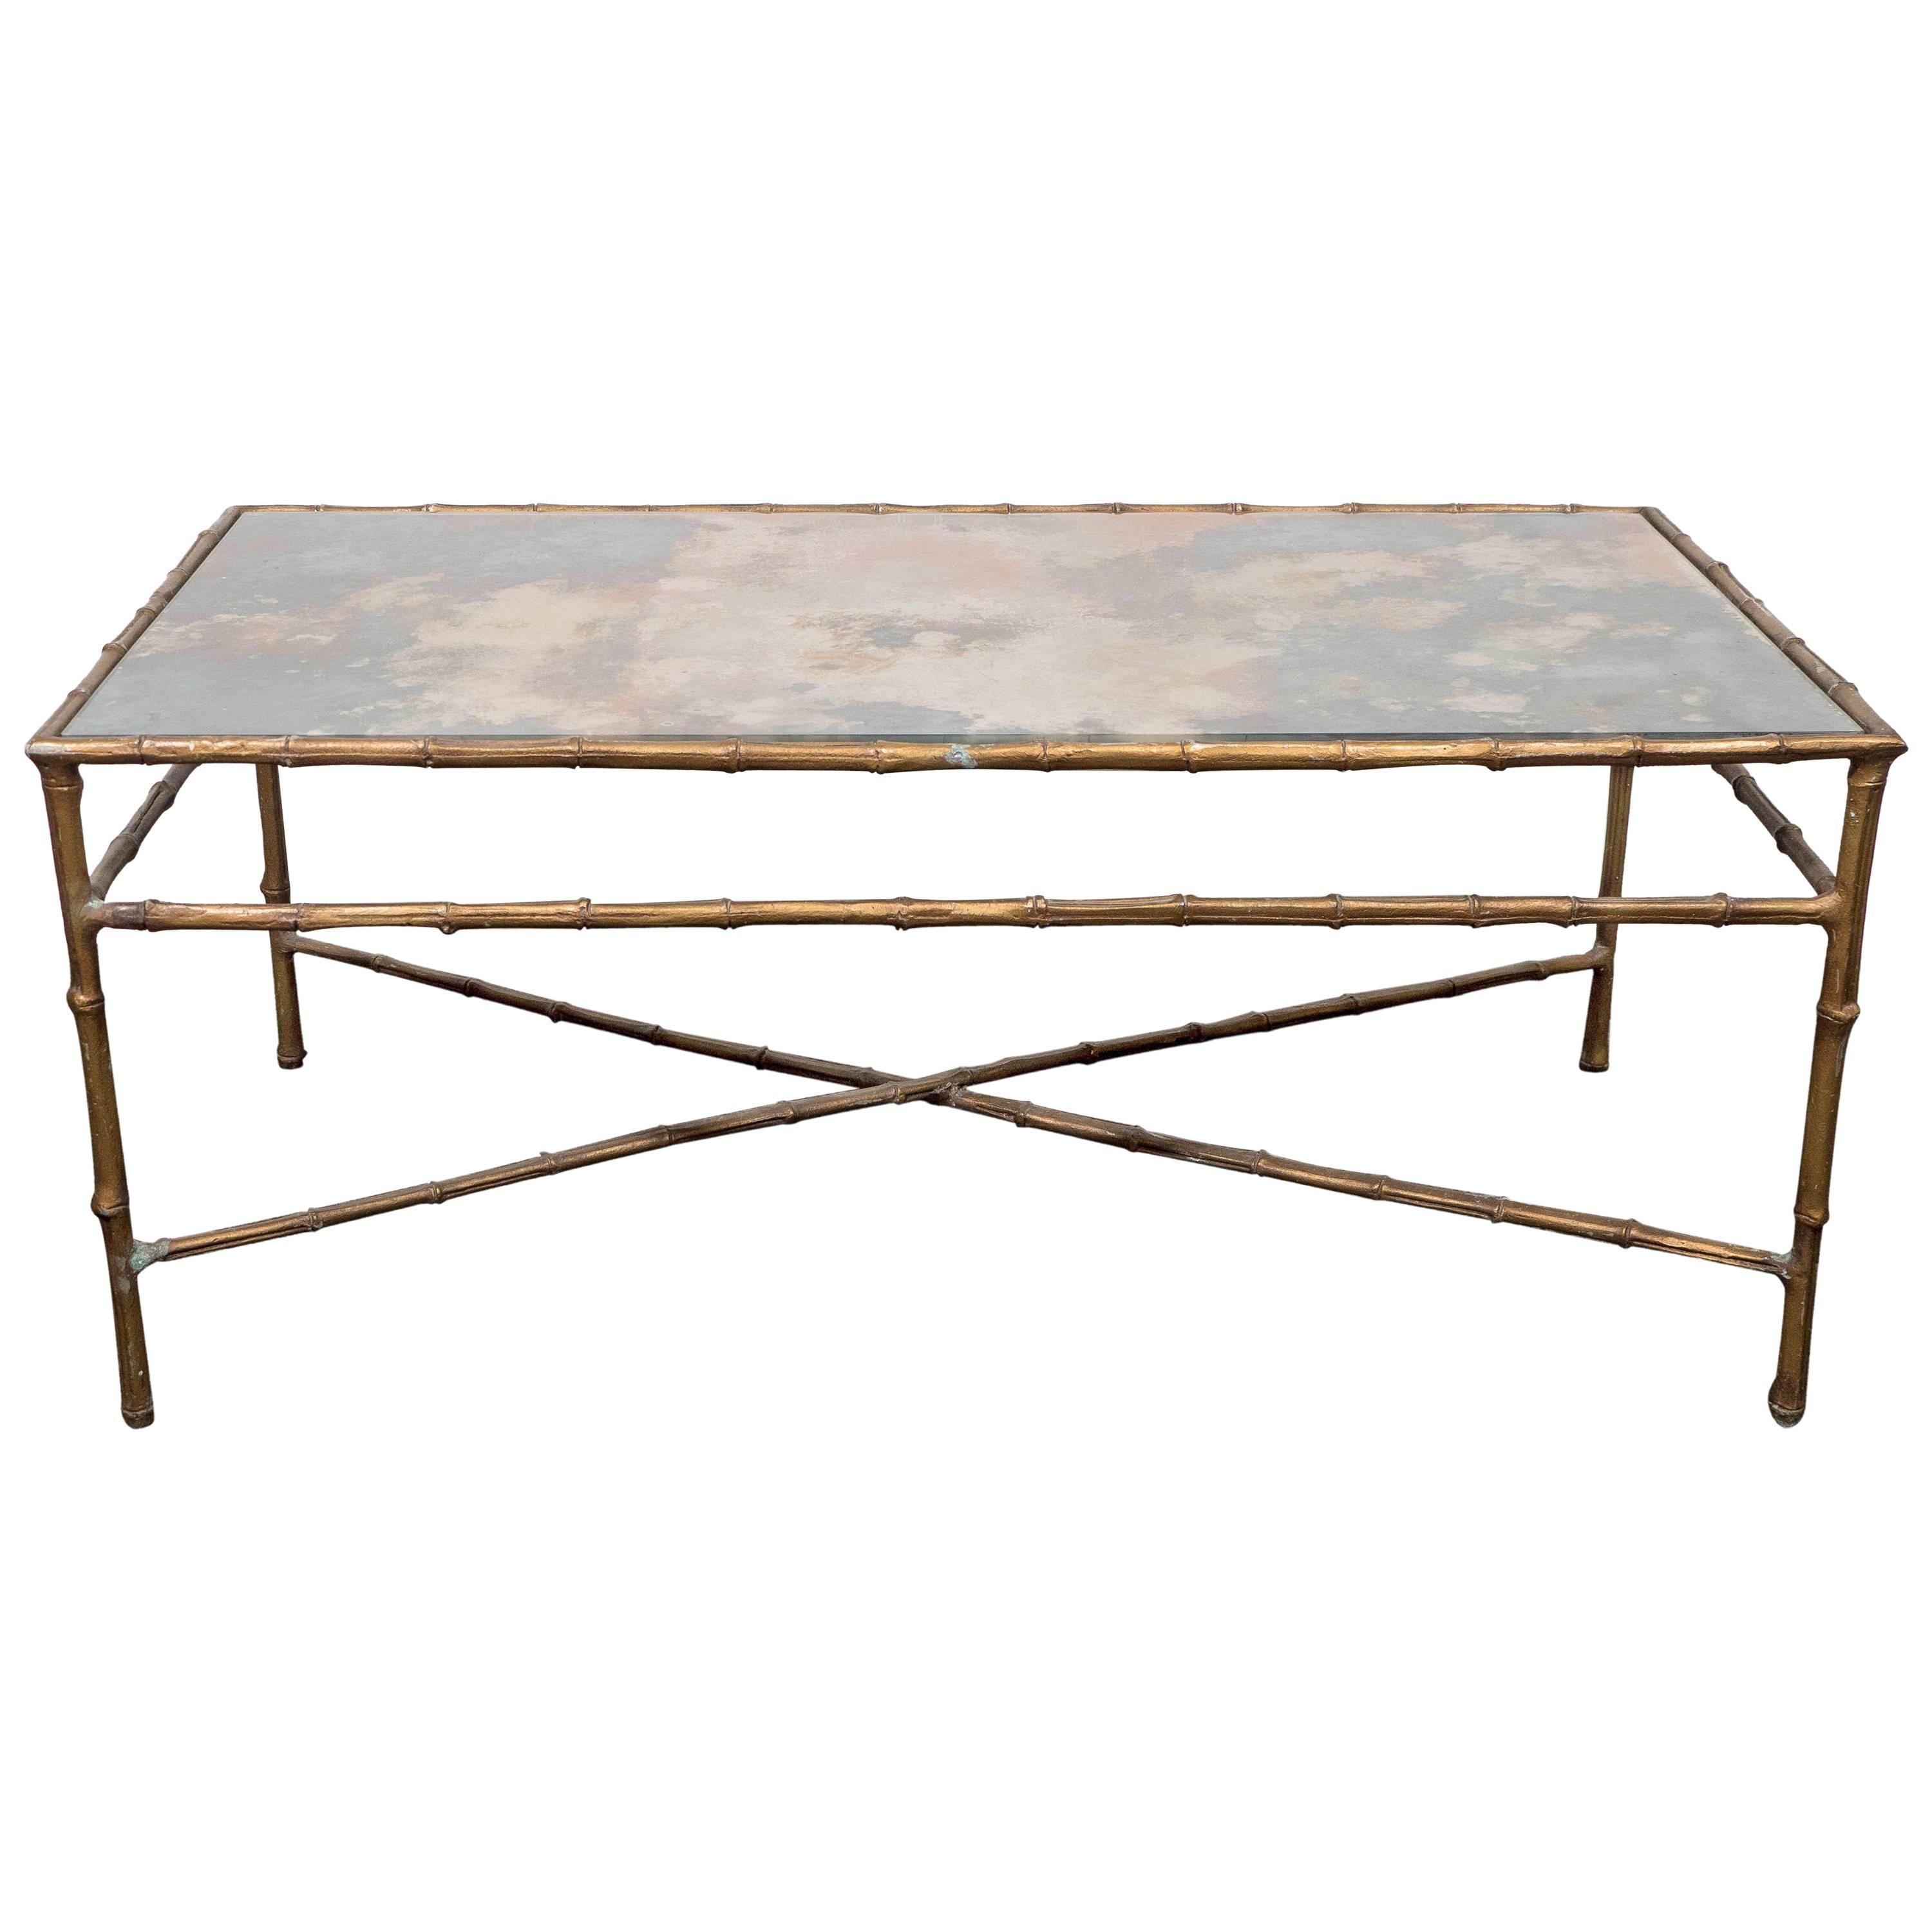 A Maison Baguès Style Faux Bamboo Brass Coffee Table with Smoked Glass Top